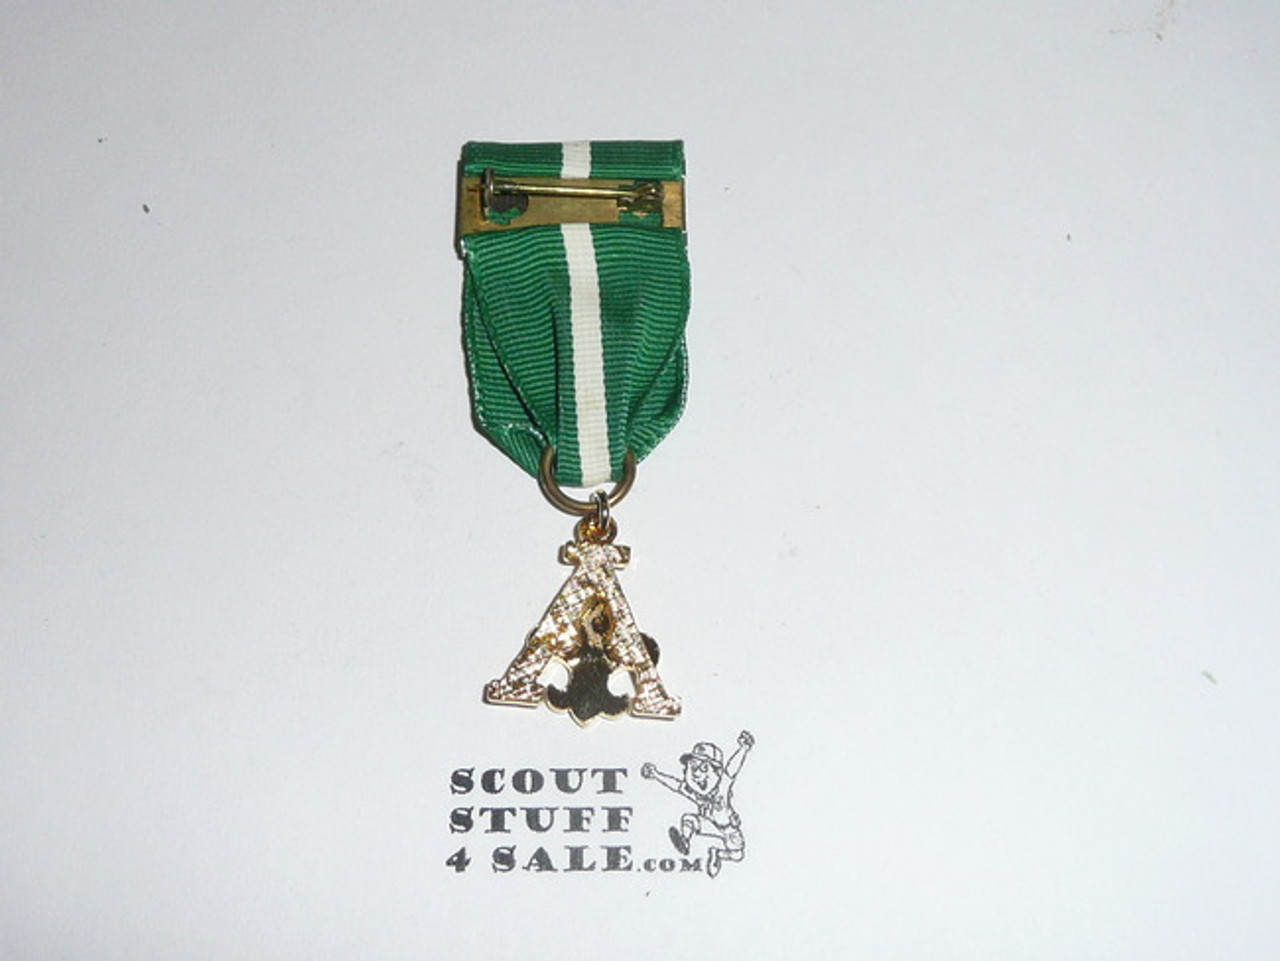 Scouter's Training Award Medal with Green/white Ribbon (A Design), 10k gold filled